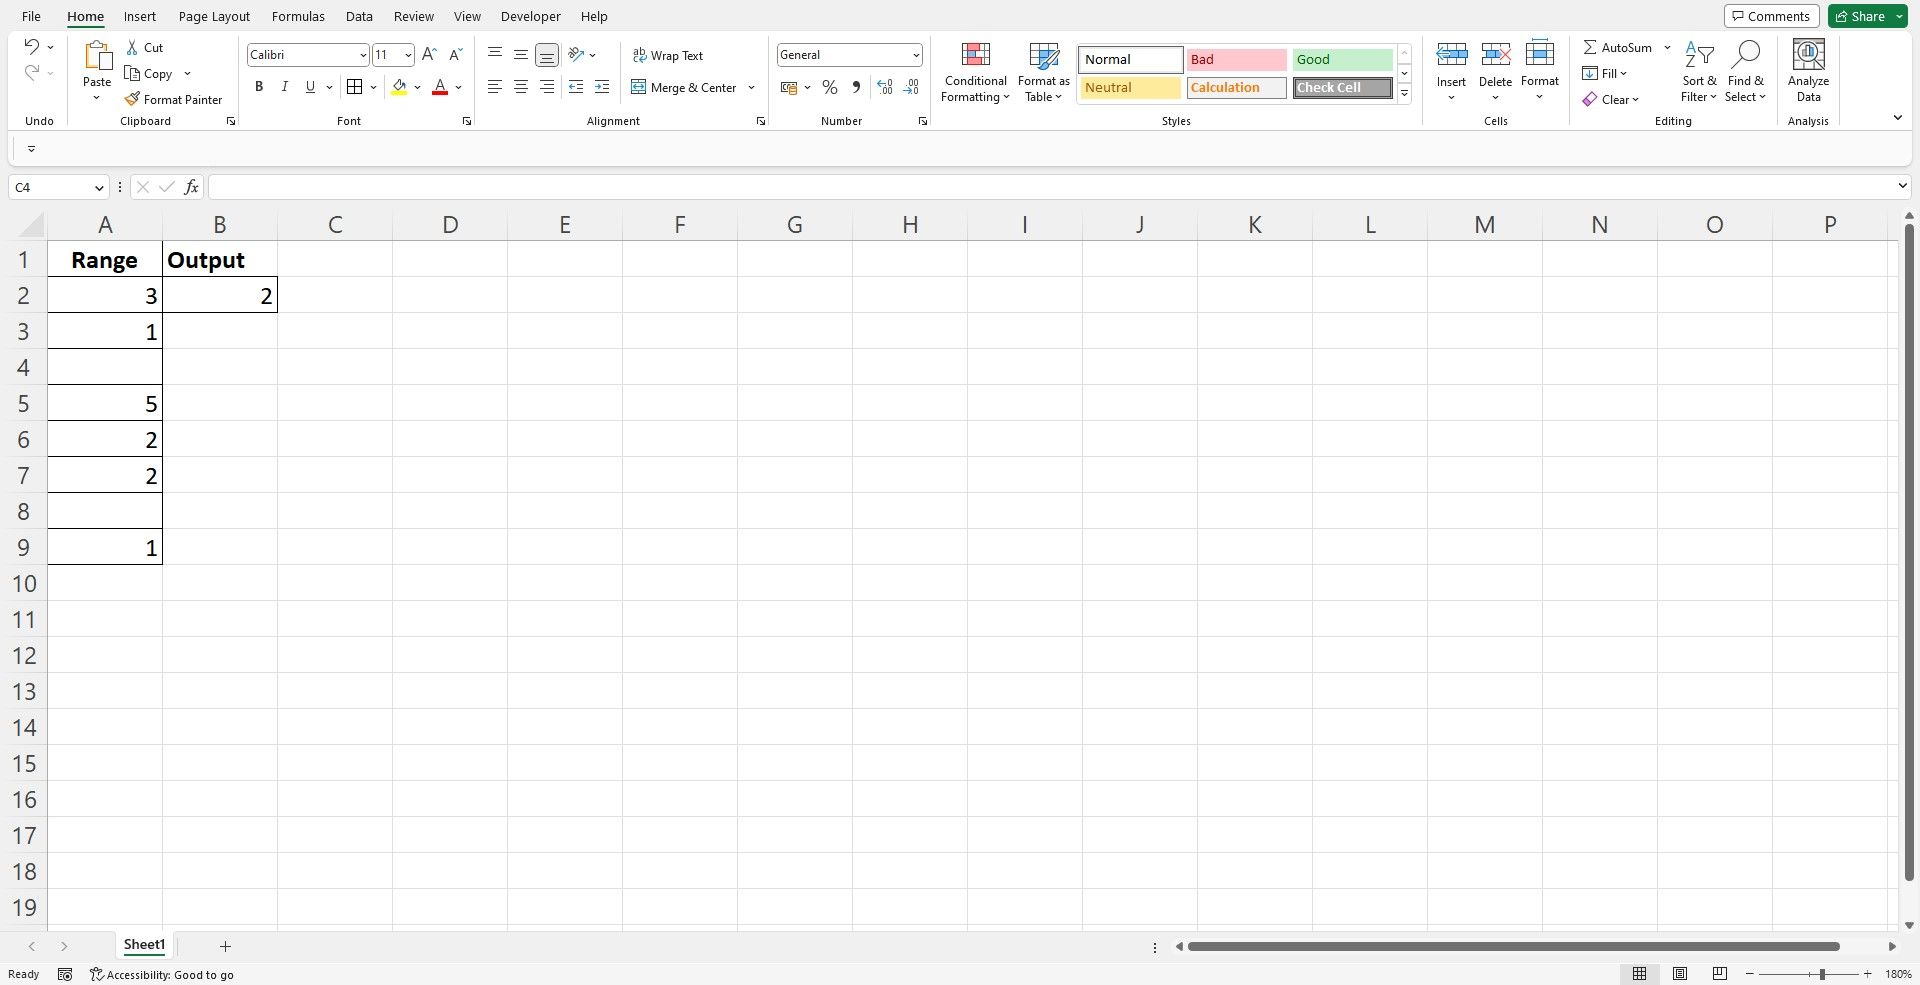 Excel interface showing the usage of countblank function